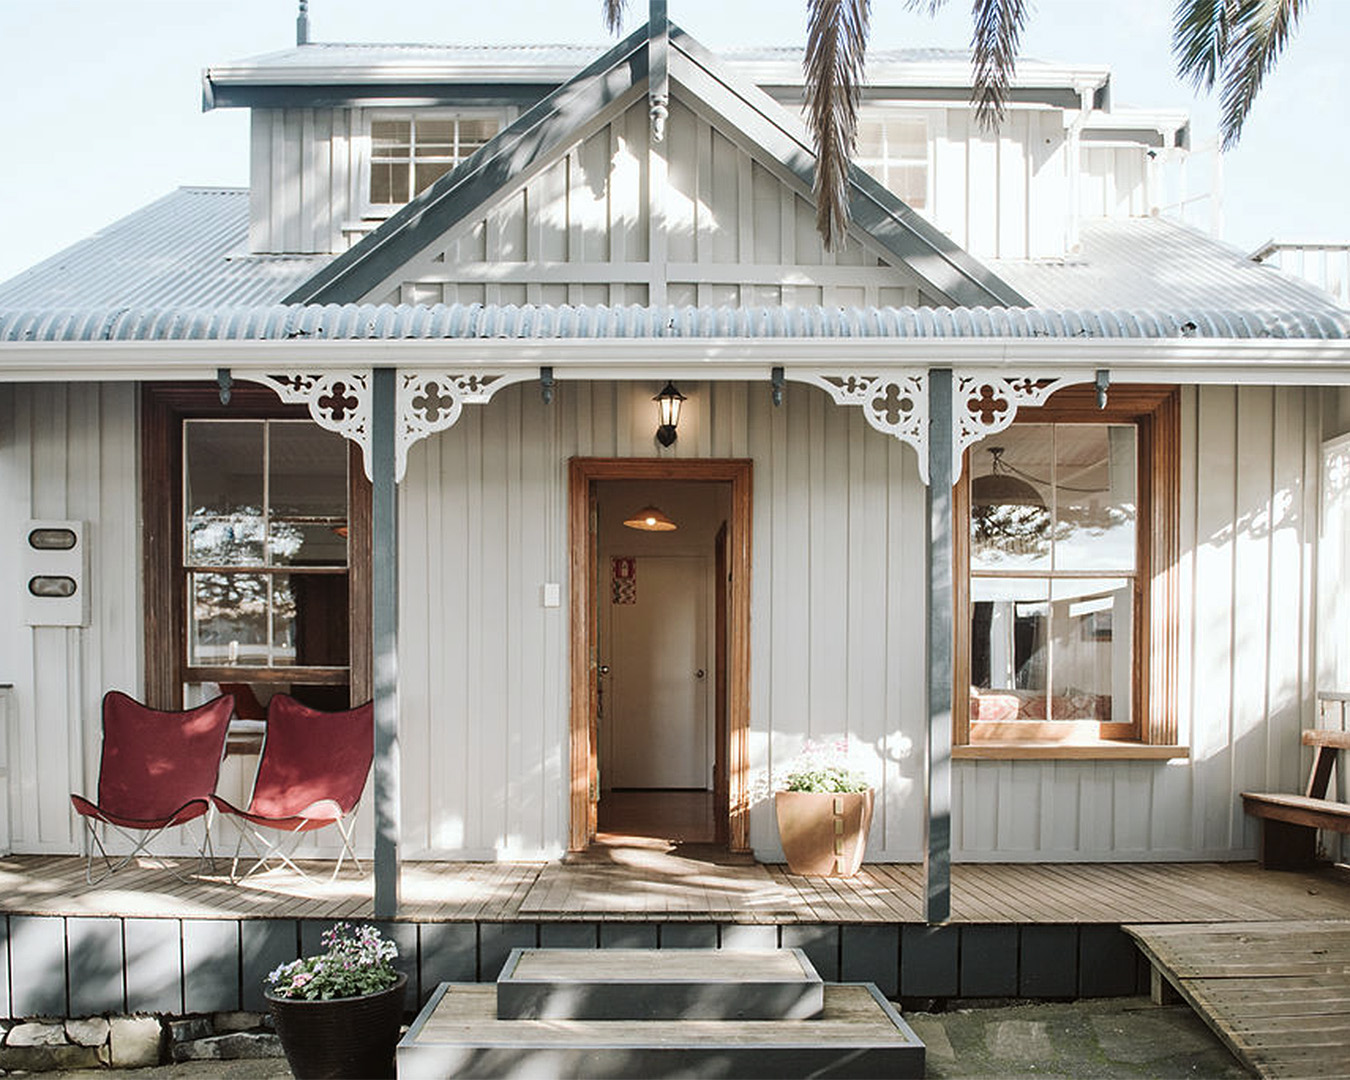 9 Of The Best Places To Stay In Raglan | Urban List NZ